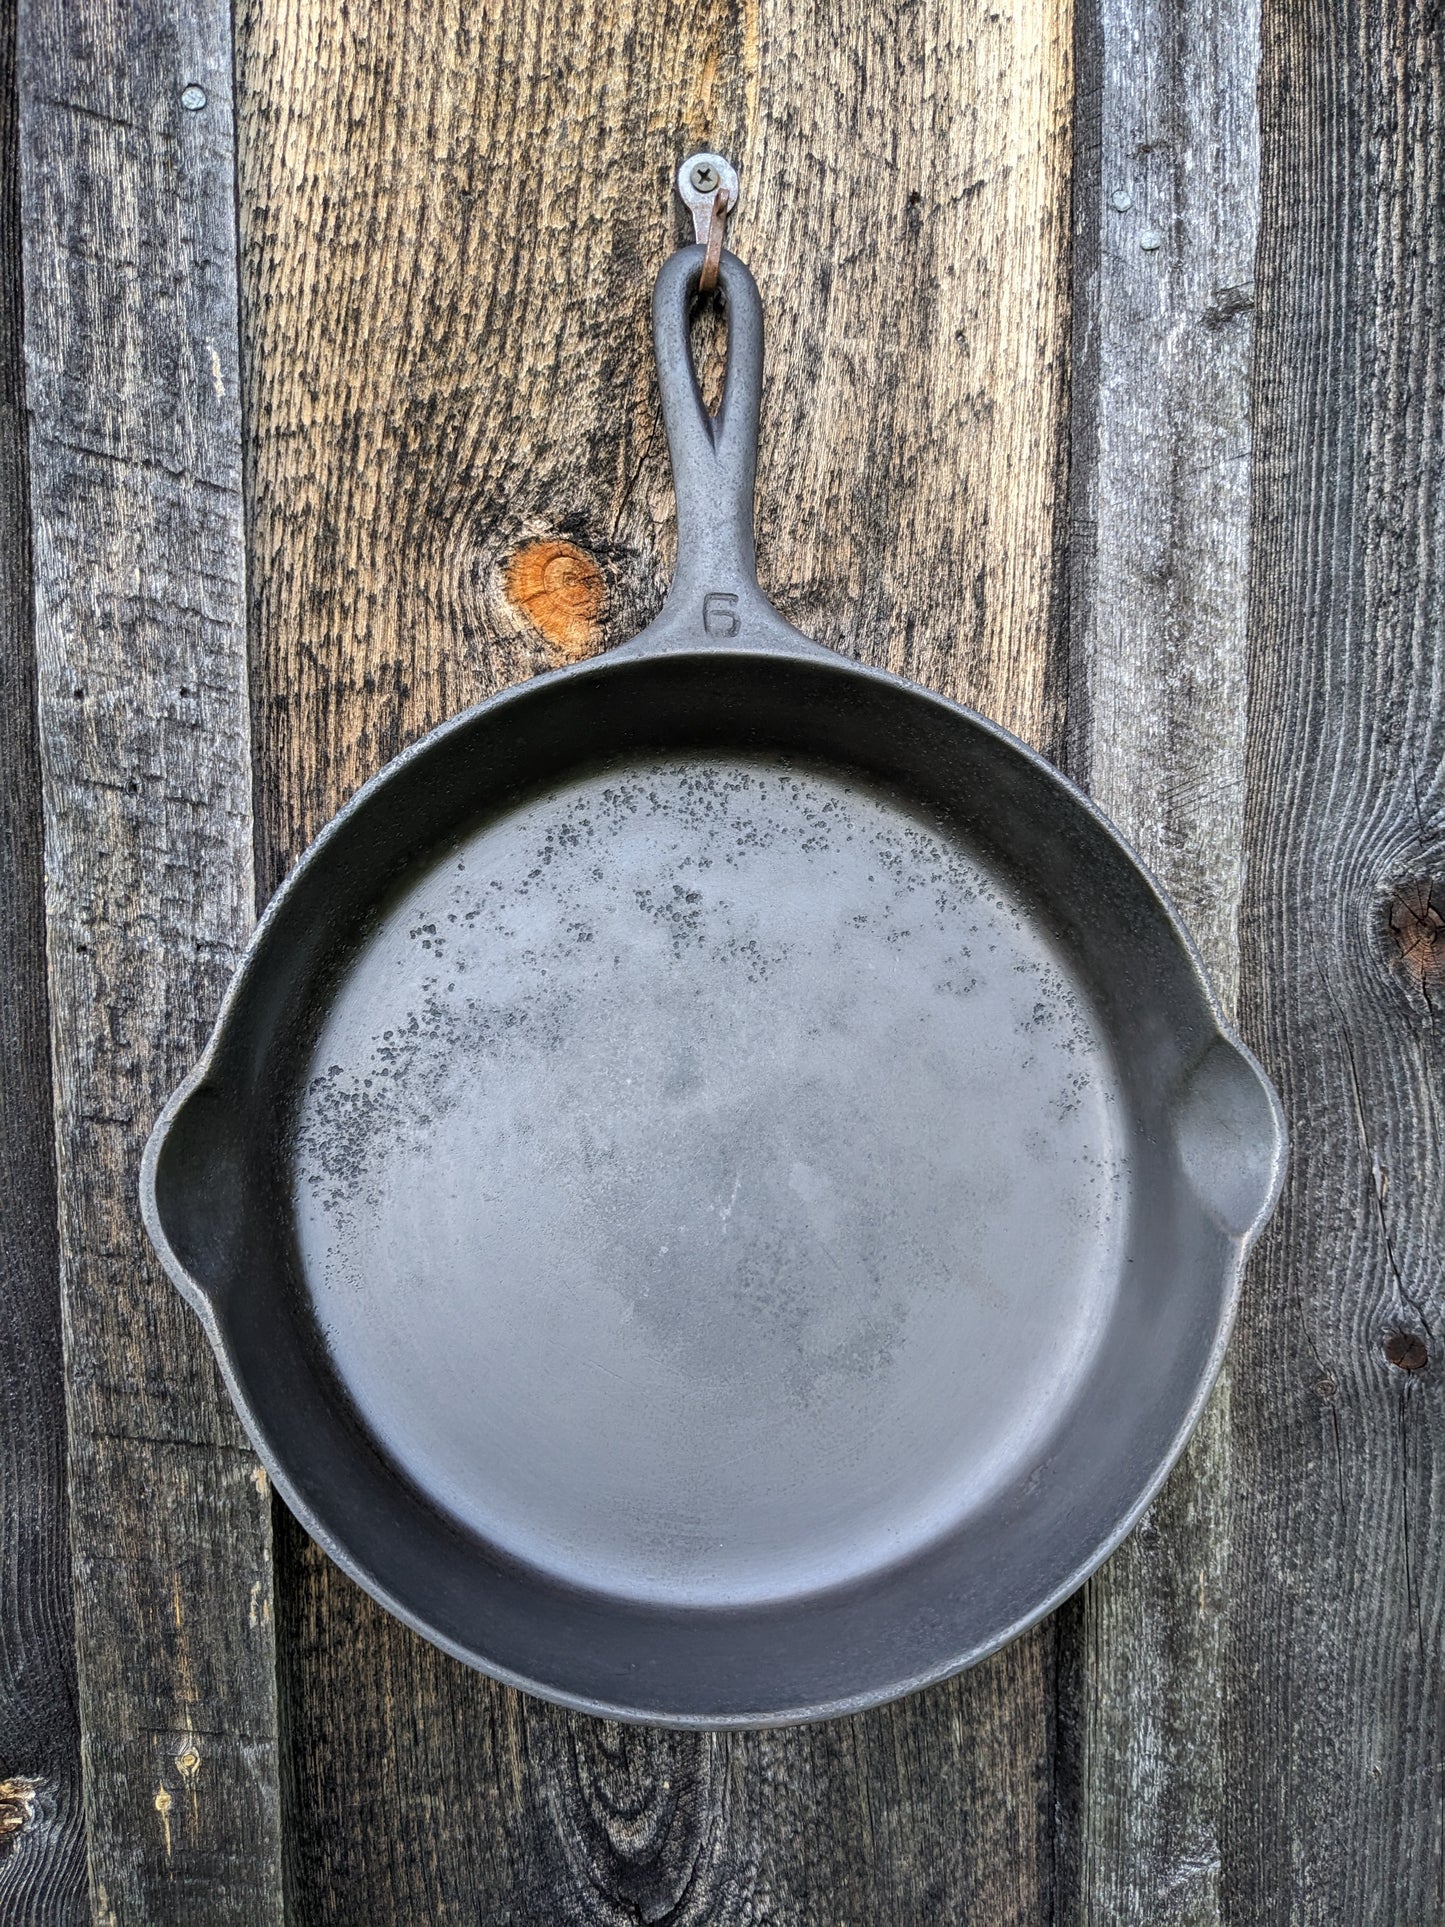 Unboxing A Rare Vintage Griswold Cast Iron Skillet in 2019 